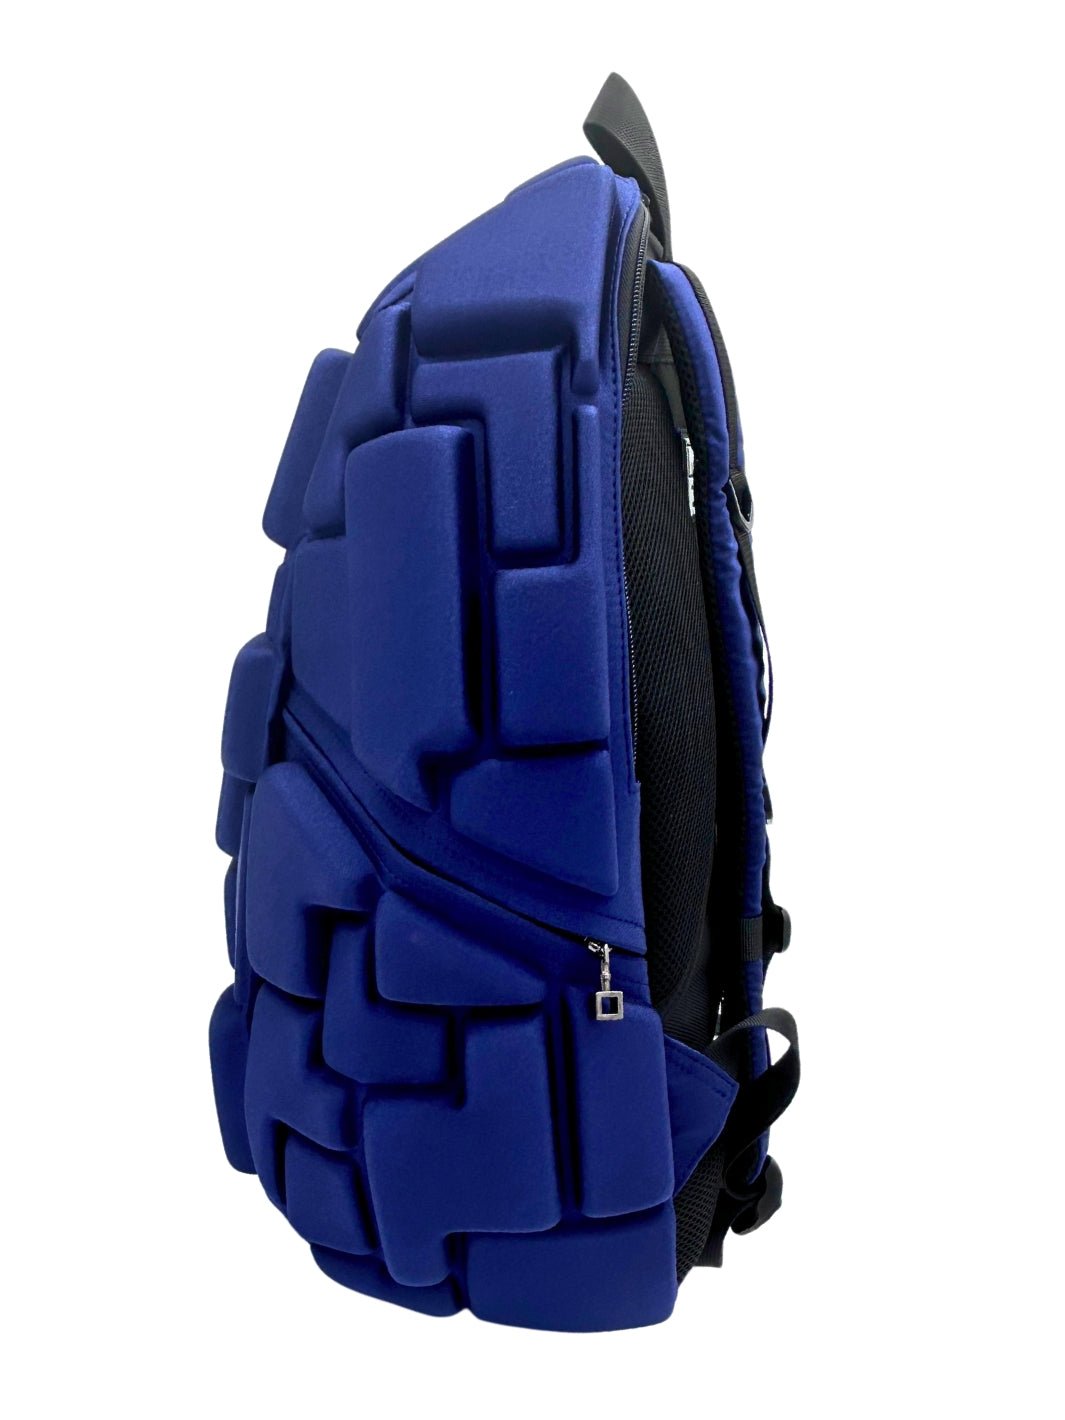 Side view of Wild Blue Yonder navy blue ackpack - Madpax